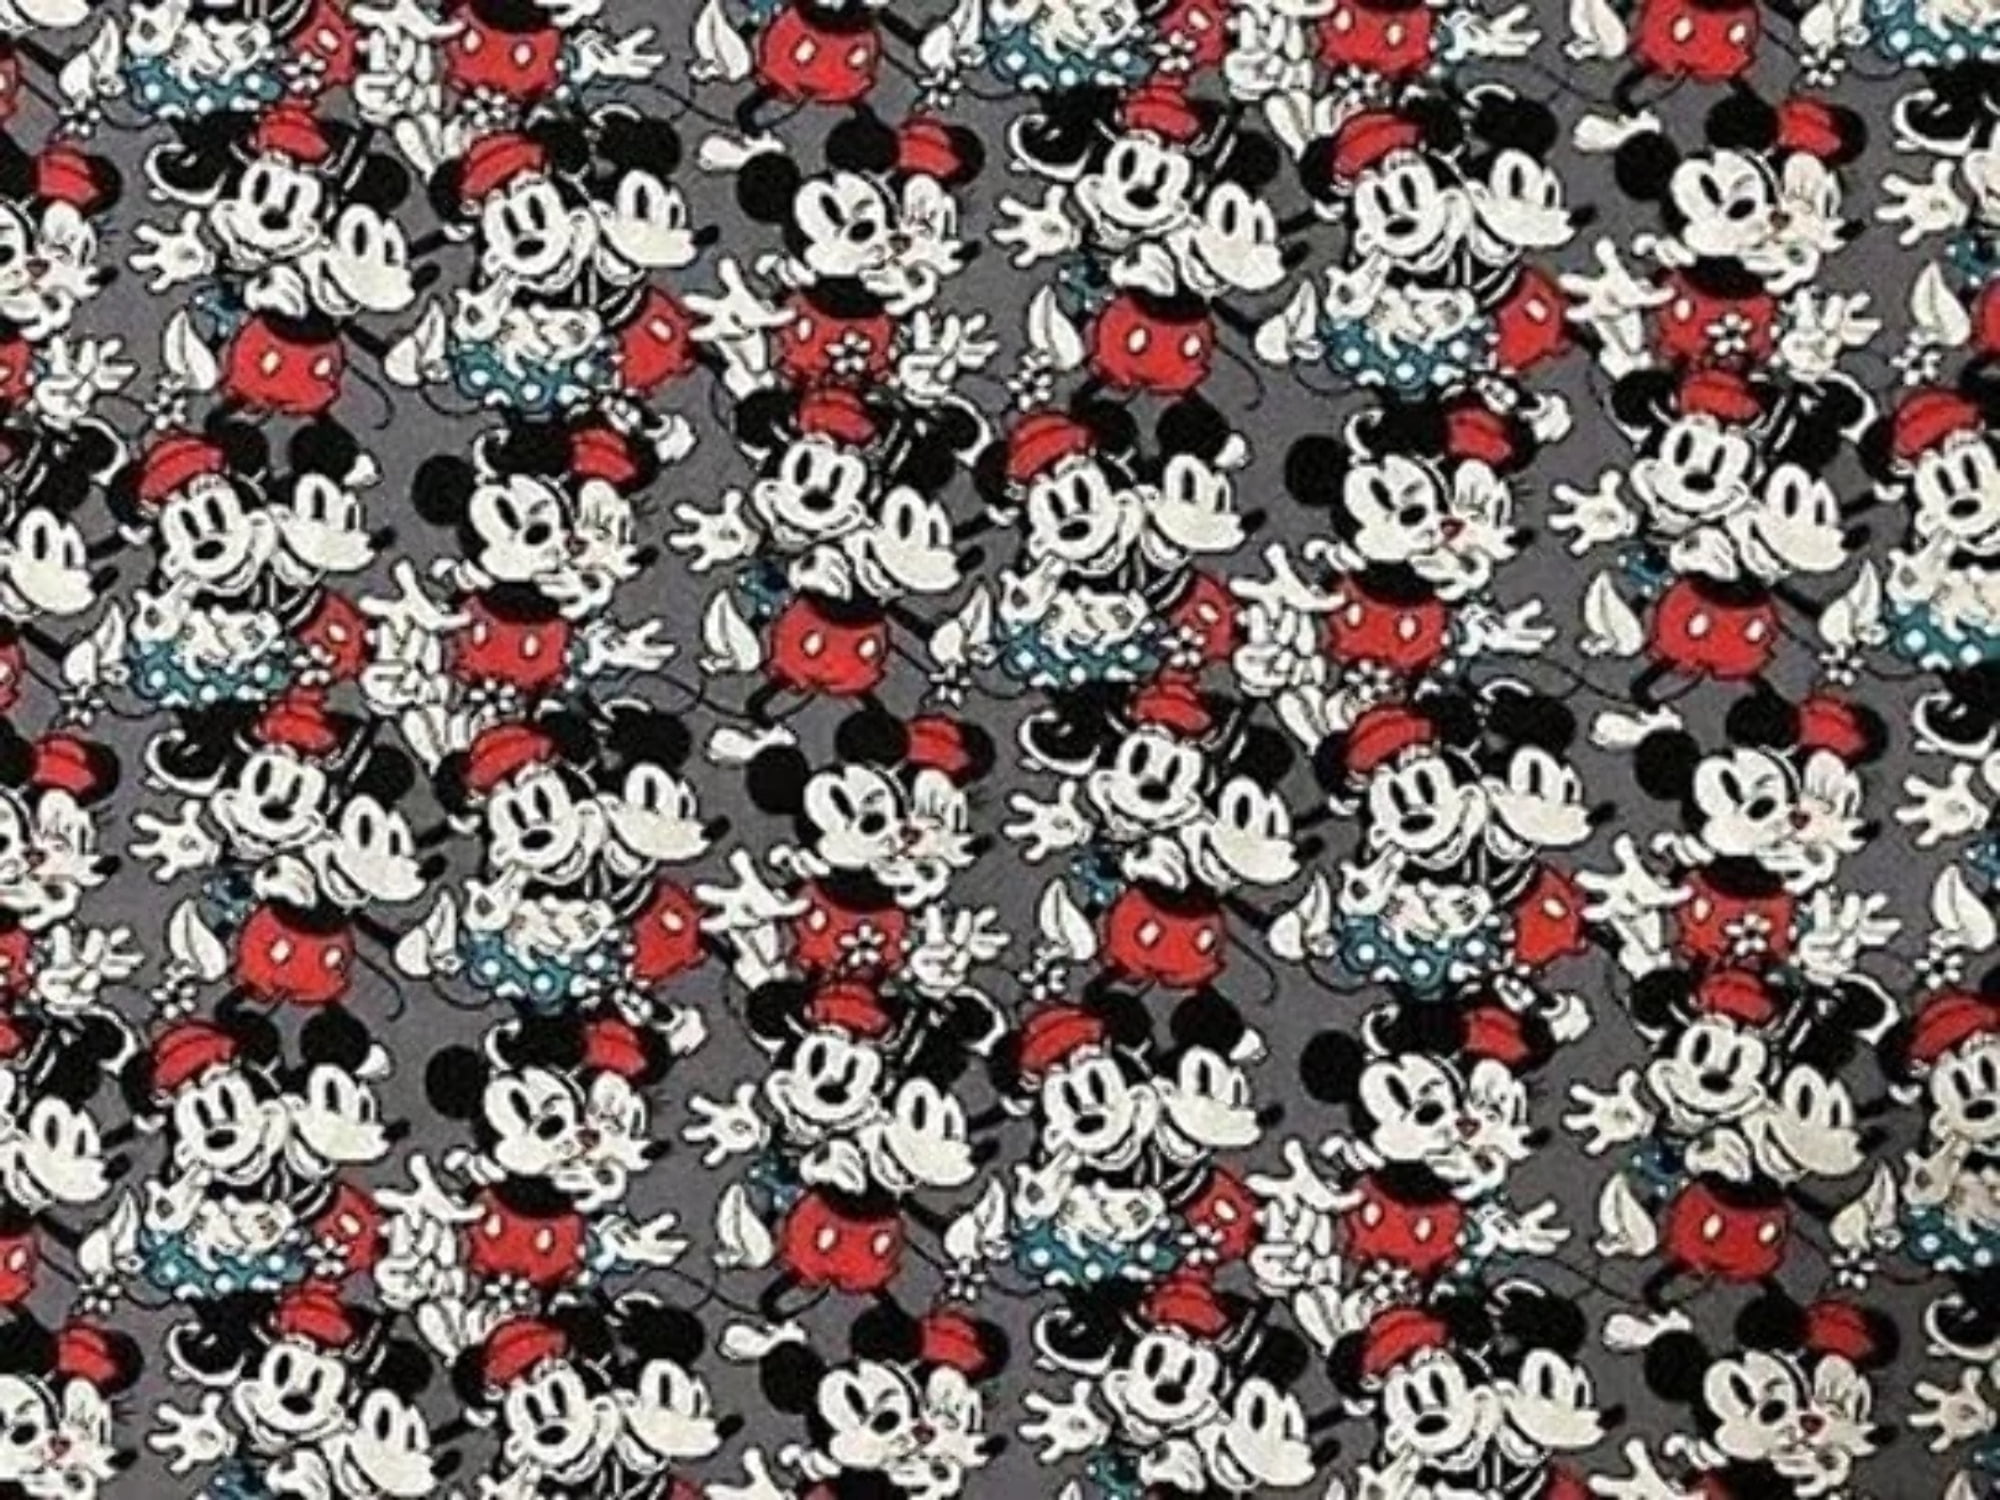 Disney Store Mickey Mouse Placemat Table Mat Dinnerware Red Black Place Mat New 